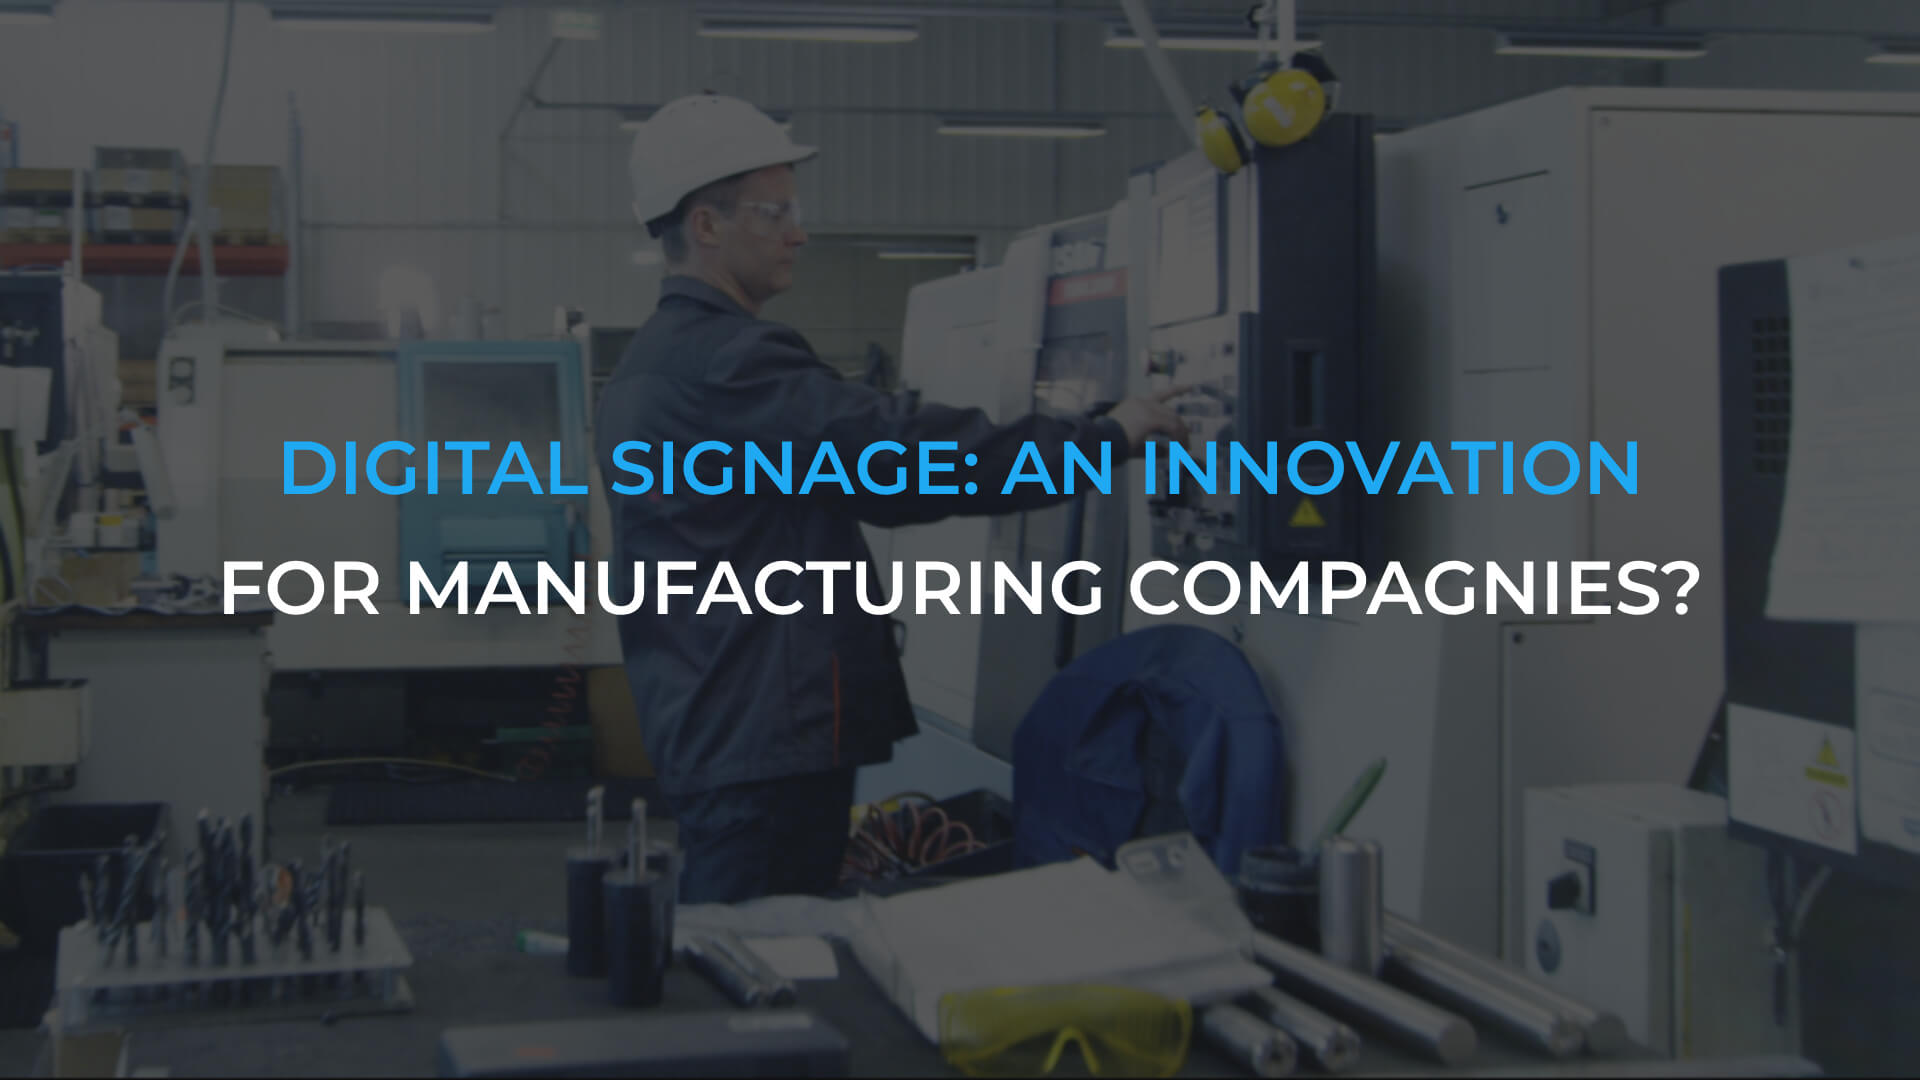 Digital signage: An innovation for manufacturing companies?